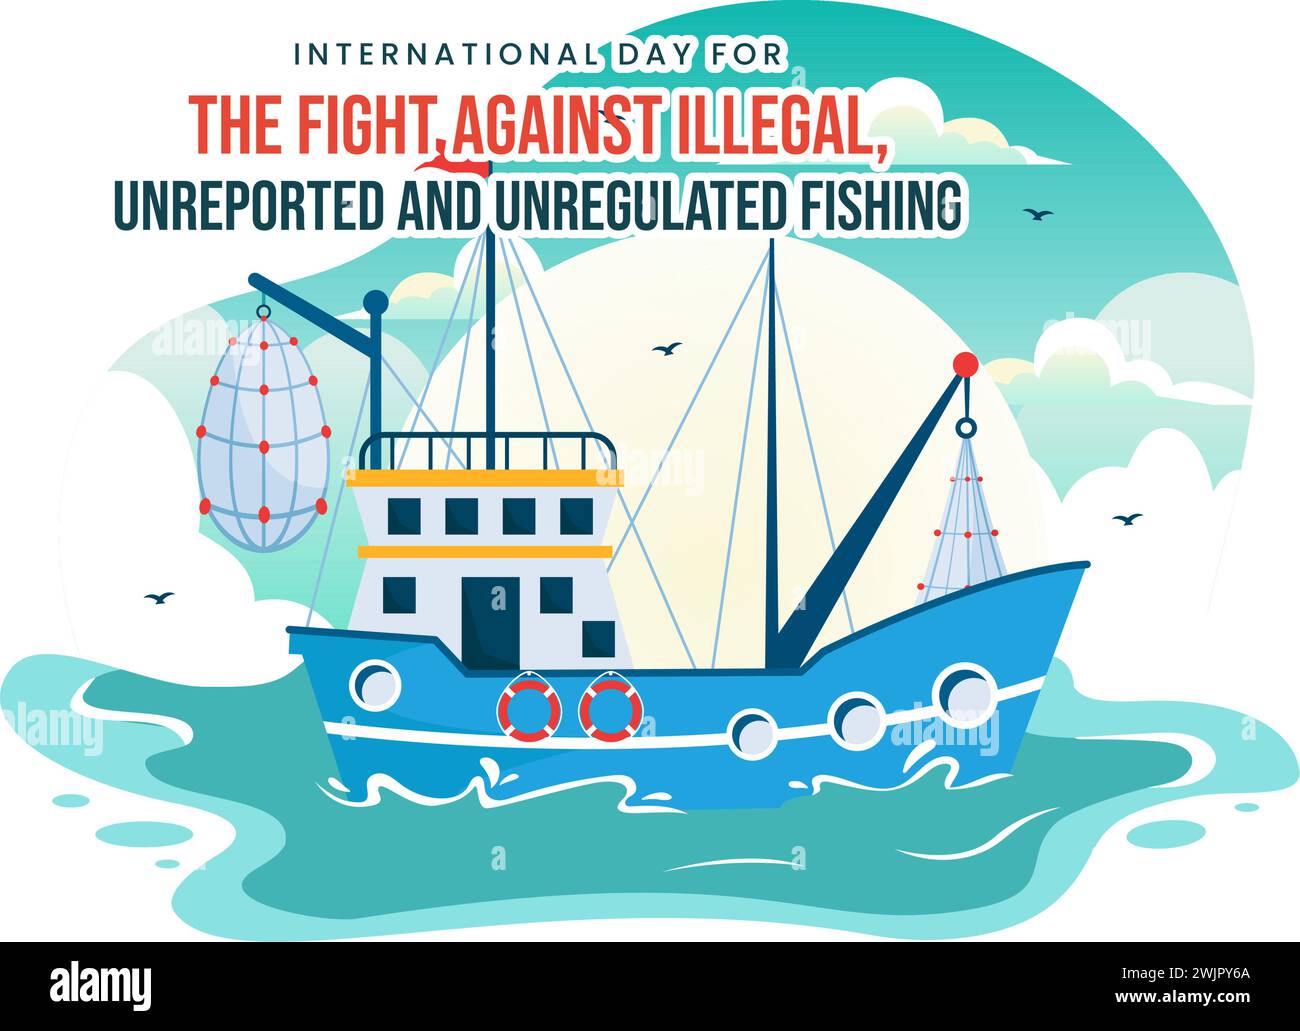 International Day for the Fight Against Illegal, Unreported and Unregulated Fishing Vector Illustration with Rod Fish in Flat Cartoon Background Stock Vector